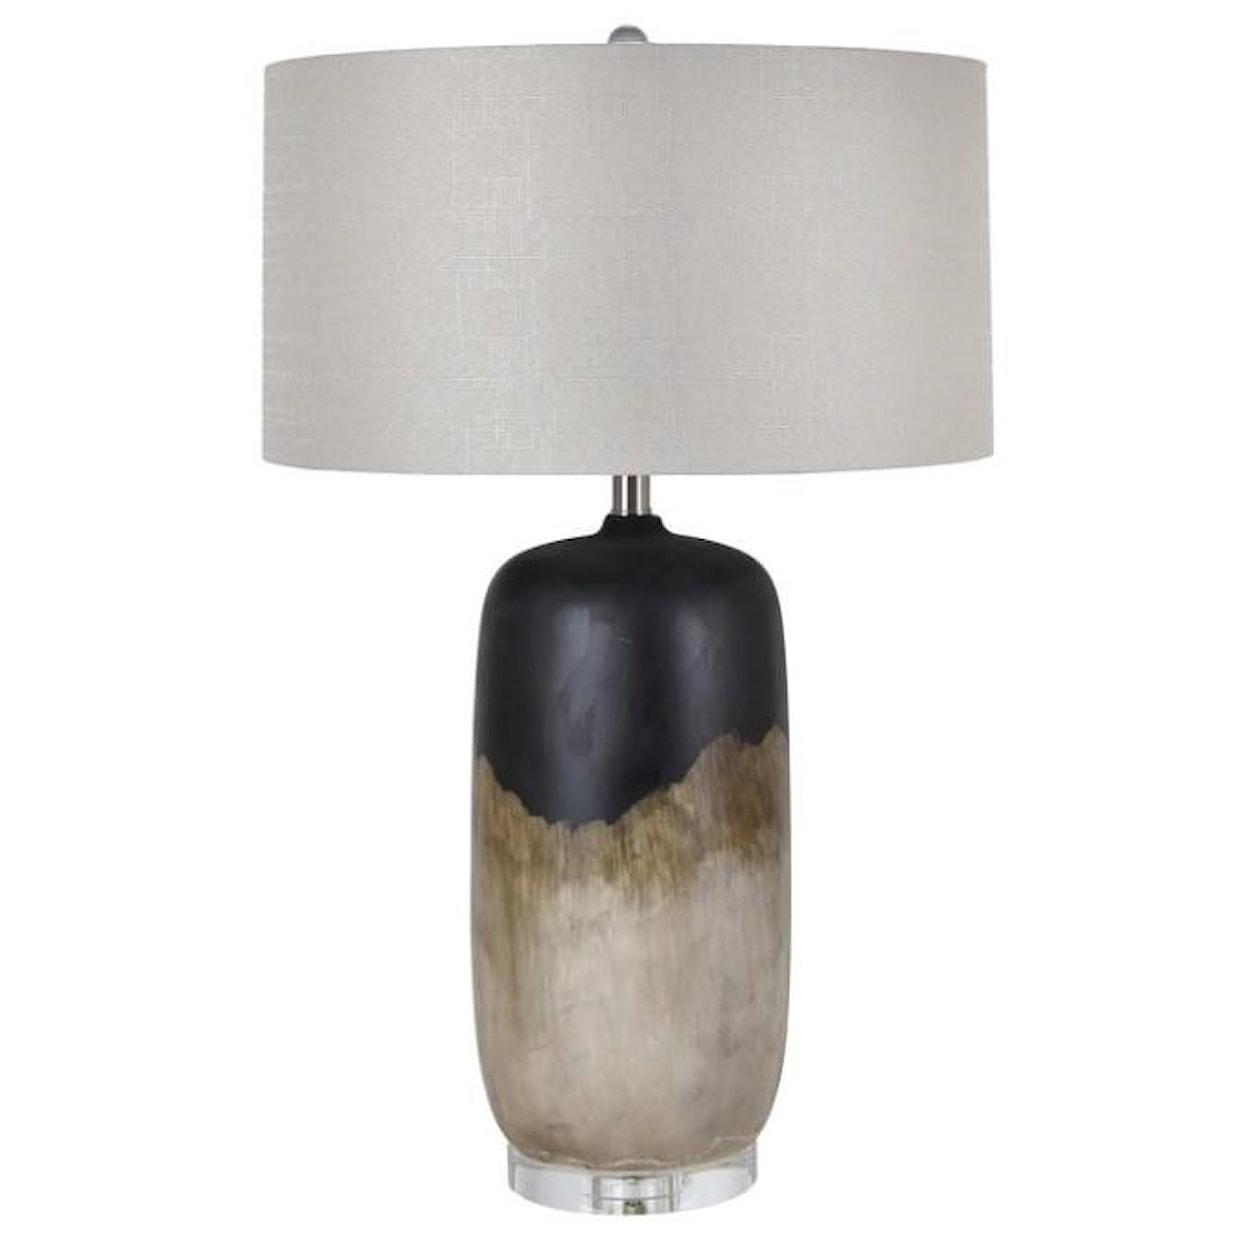 Crestview Collection Lighting Latina Table Lamp